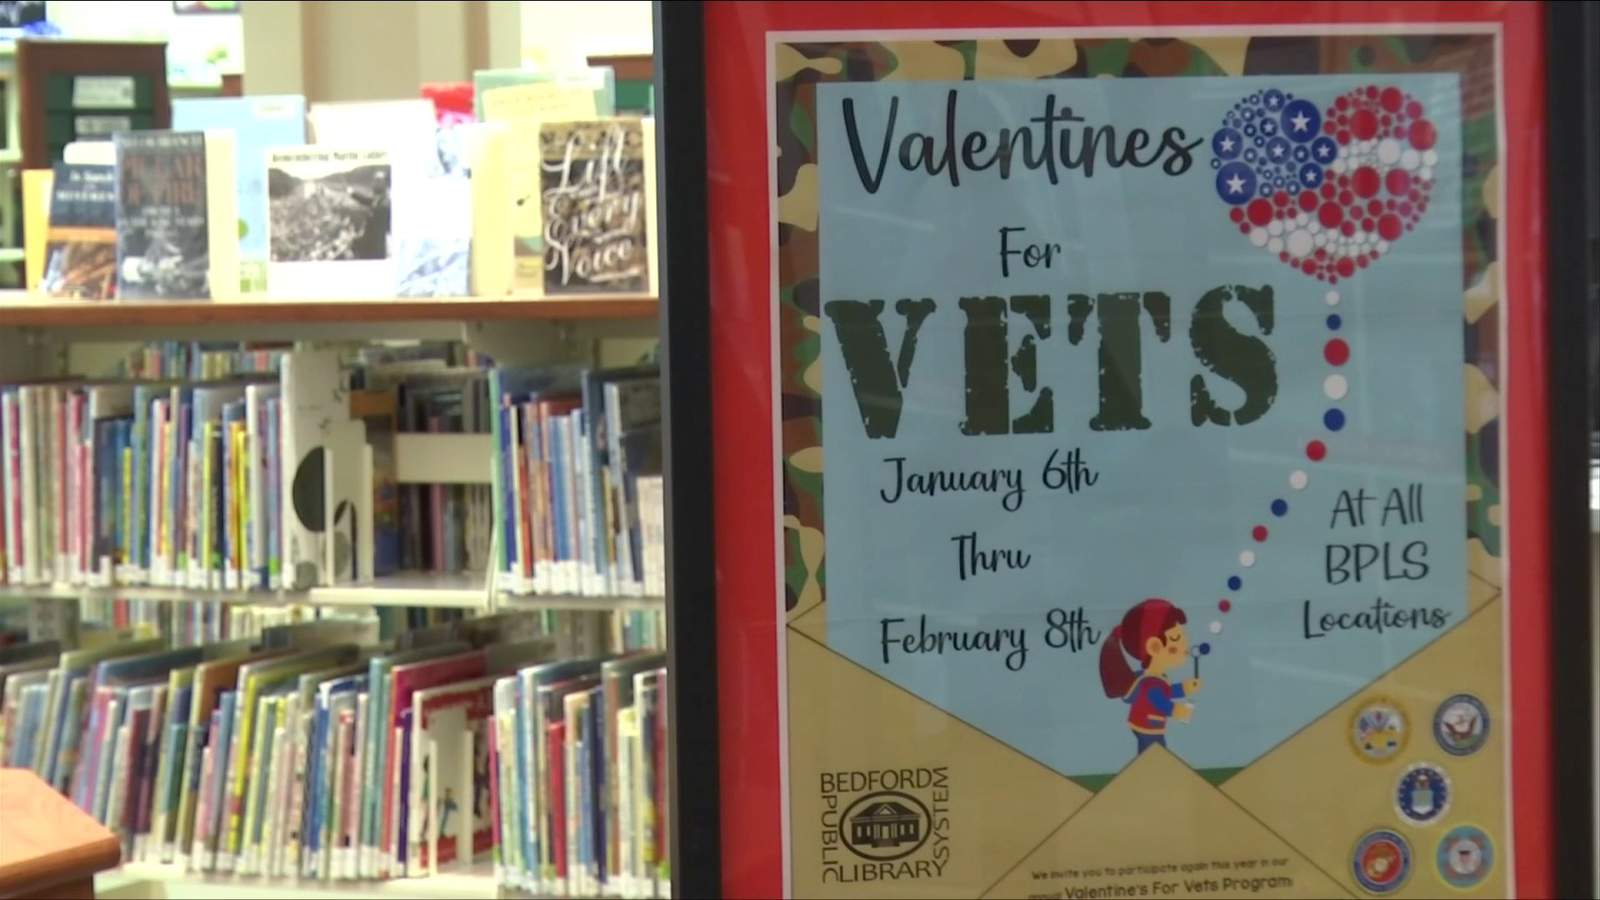 Bedford County libraries collecting Valentines for Vets